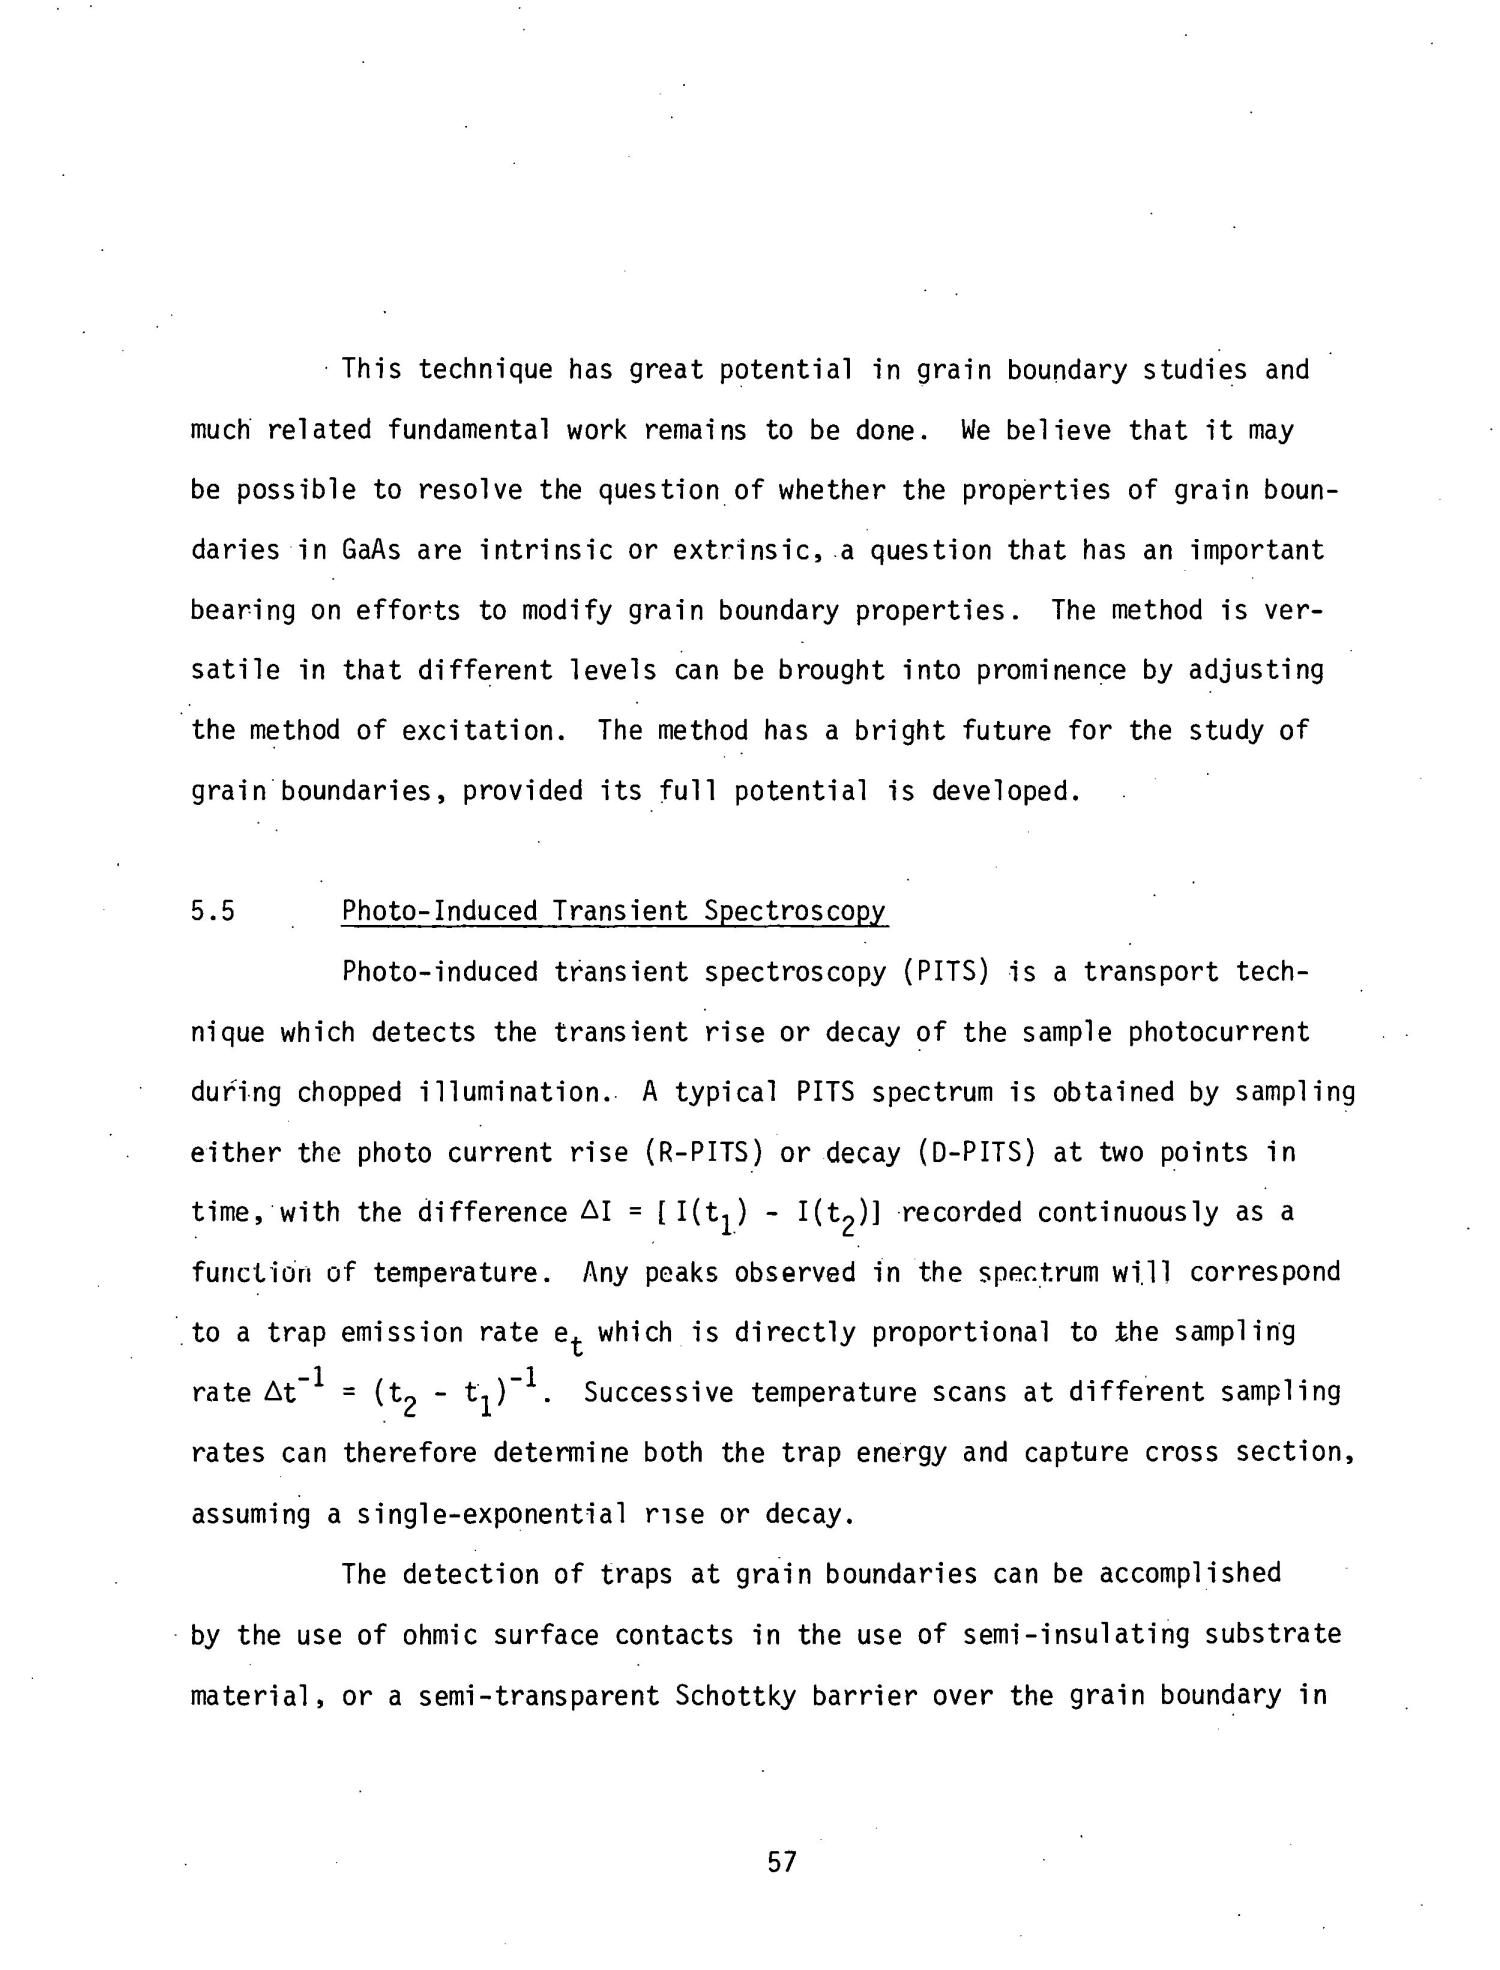 Development of polycrystal GaAs solar cells. Quarterly technical progress report No. 2 for May 1-July 31, 1979
                                                
                                                    [Sequence #]: 68 of 77
                                                